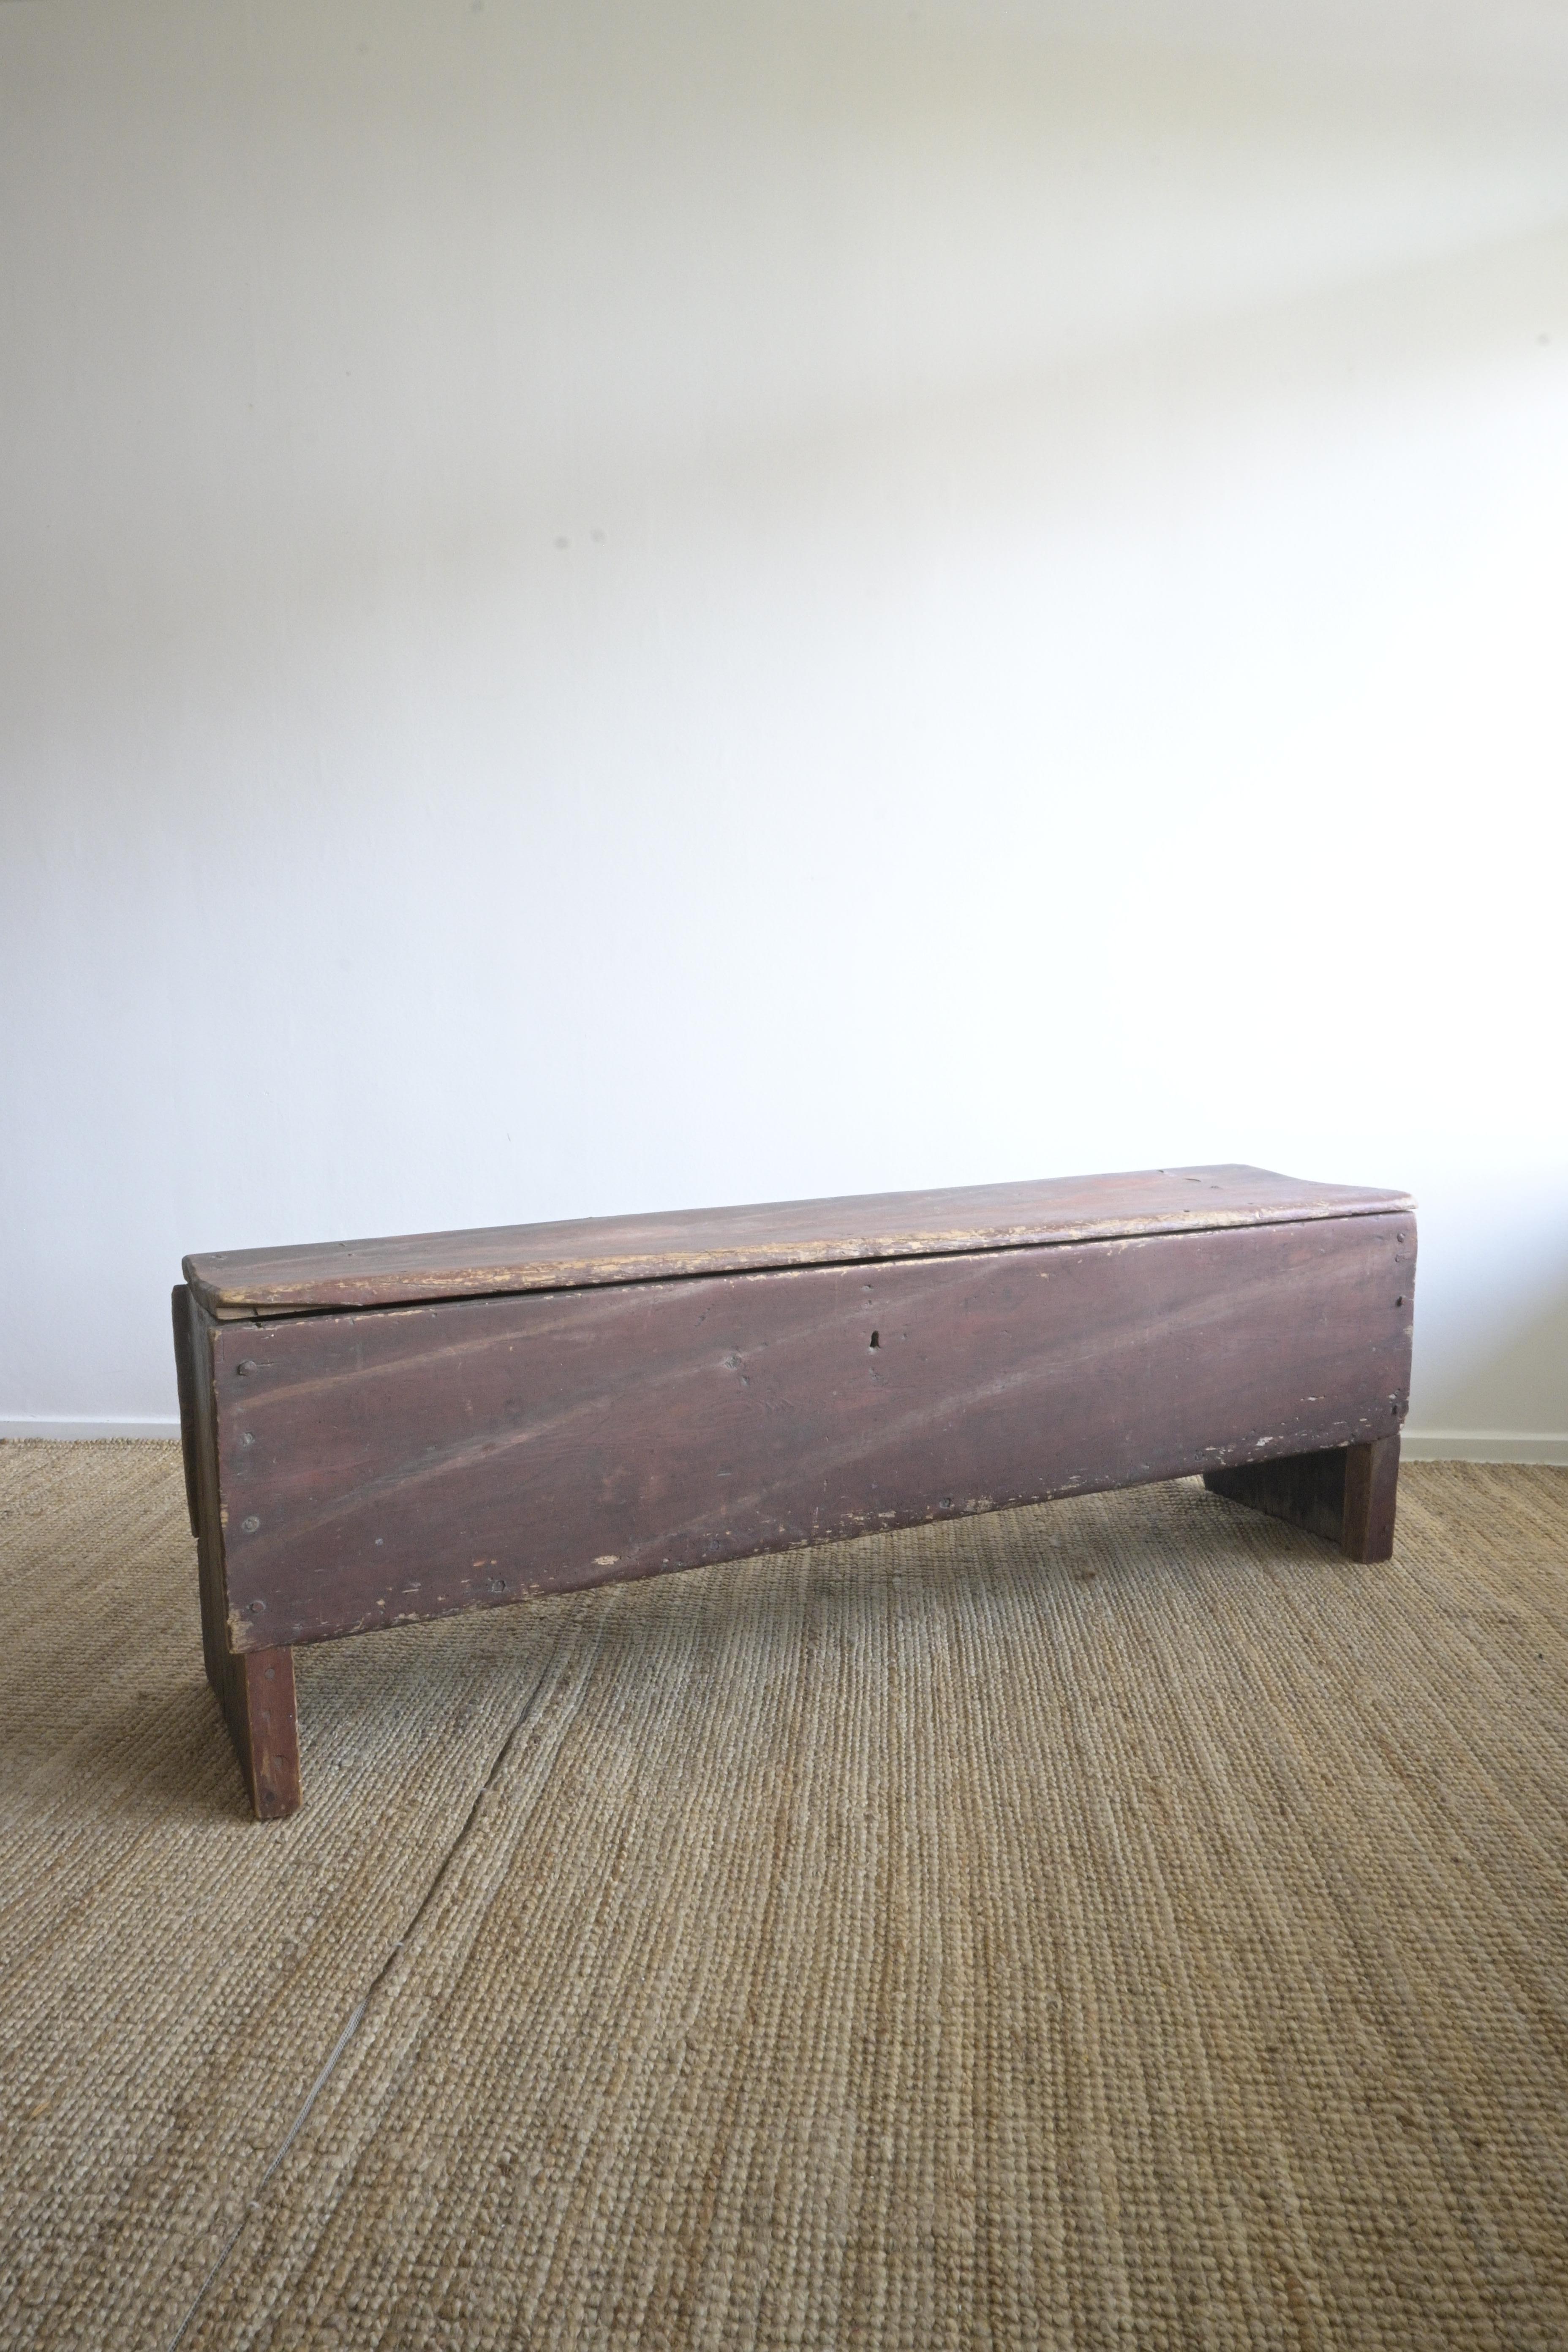 Swedish Rustic Bench 'Fållbänk' circa 1780

This Swedish follbänk really has this primitive feeling to it and an amazing painted surface.

Its dark red and brown tones and look really make it feel rustic and beautiful.

Great for storage.

Made out